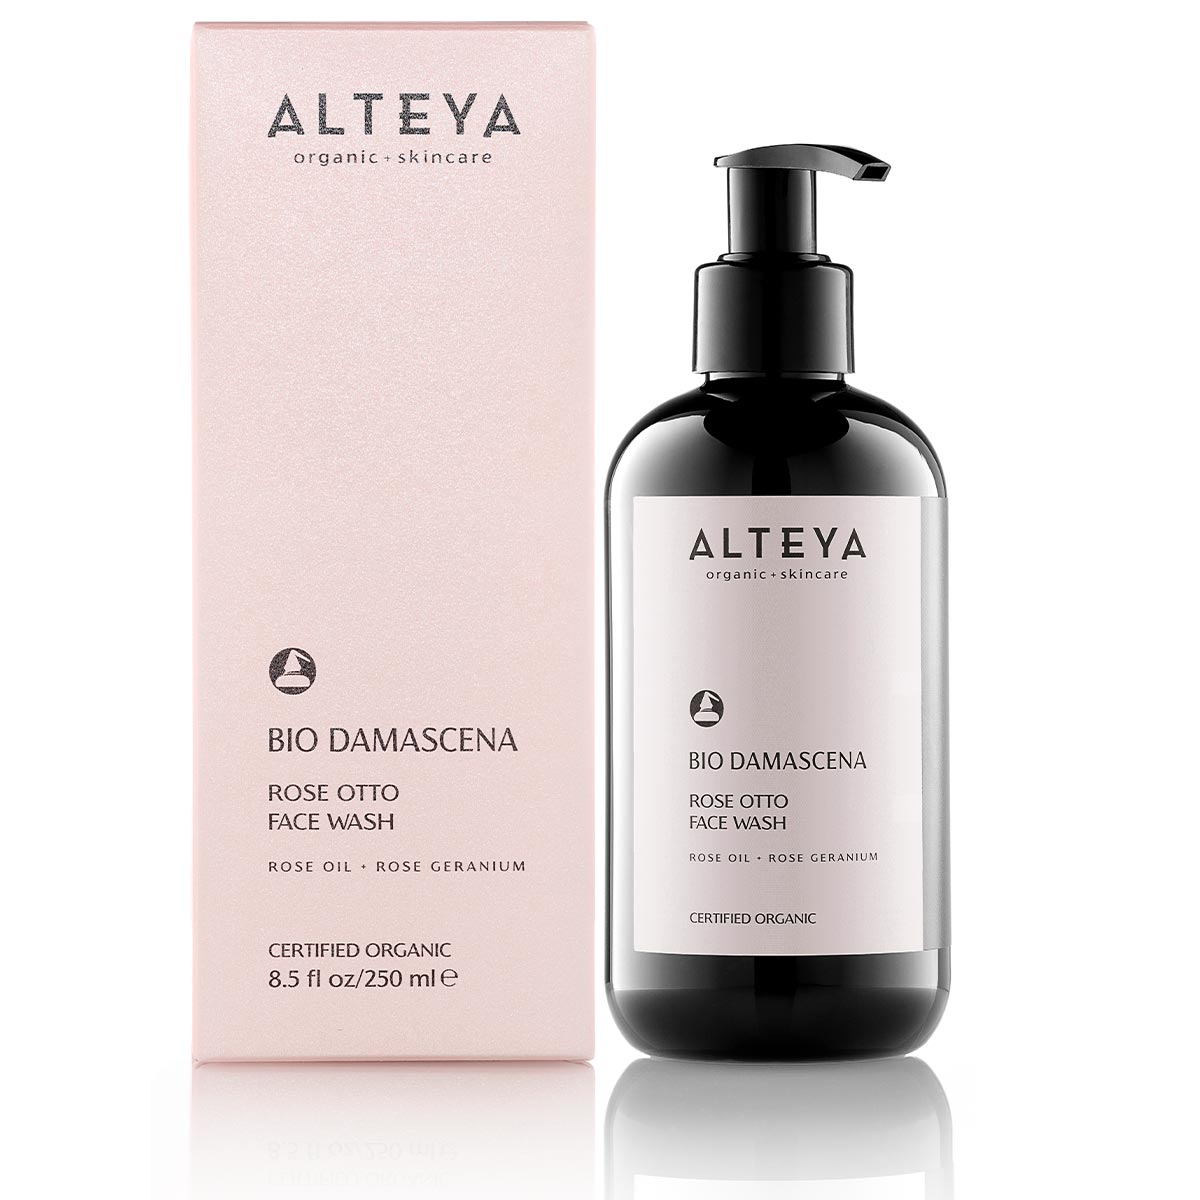 Alteya Organics Bio Damascena Rose Otto Face Wash is an organic face cleanser specifically formulated for sensitive skin.